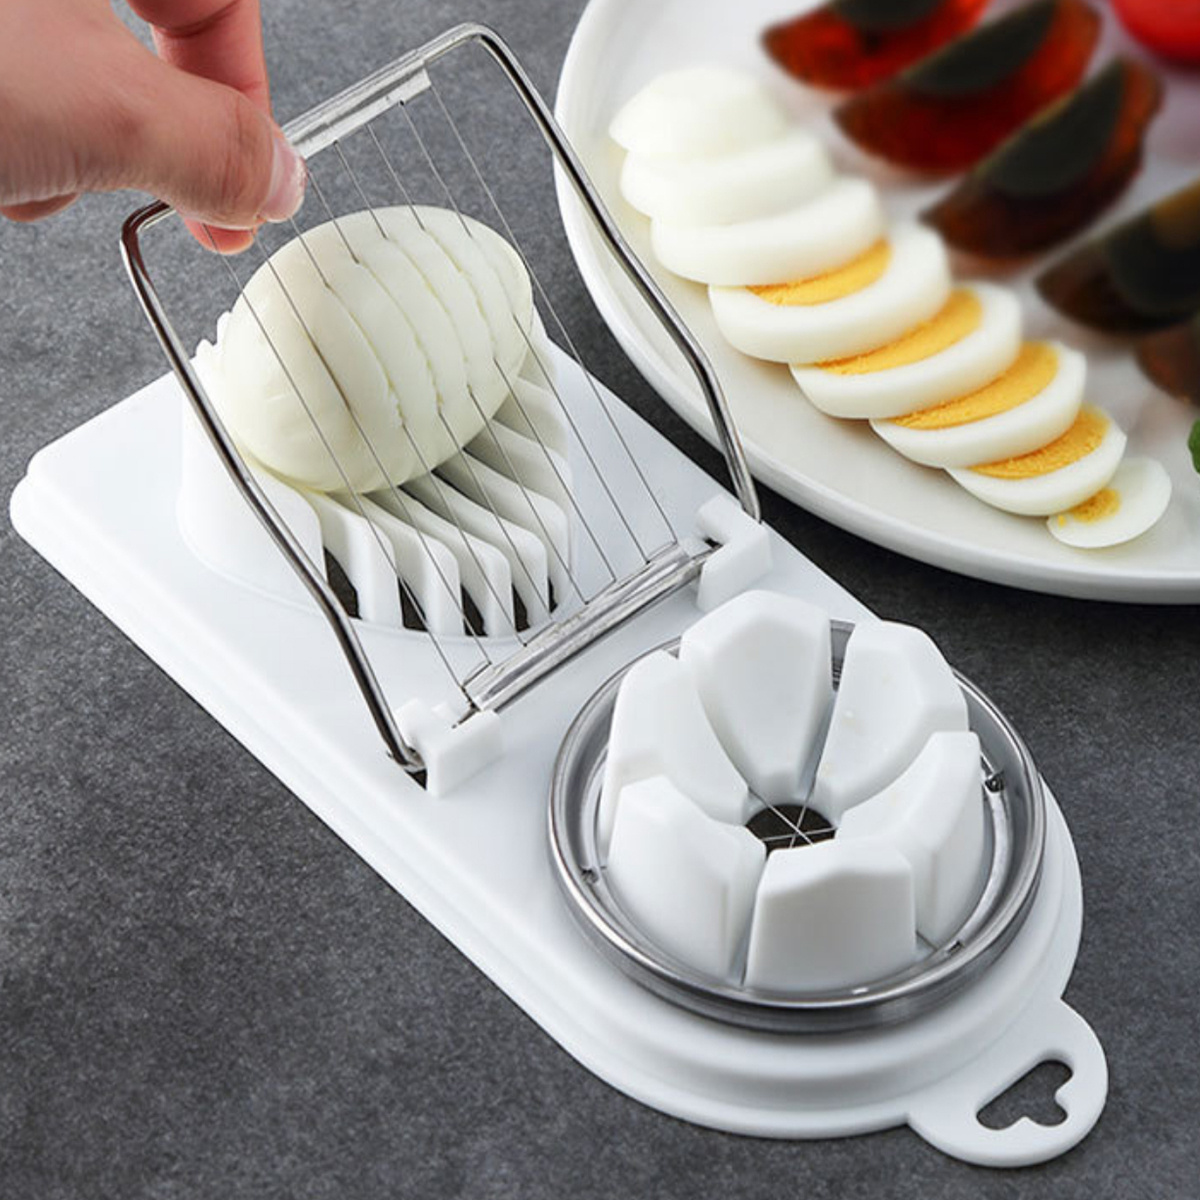 Stainless Steel Egg Slicers Cutters Boiled Eggs Divider Splitter Eggs Tools  Strawberry Slicers Cutters Kitchen Tools Accessories